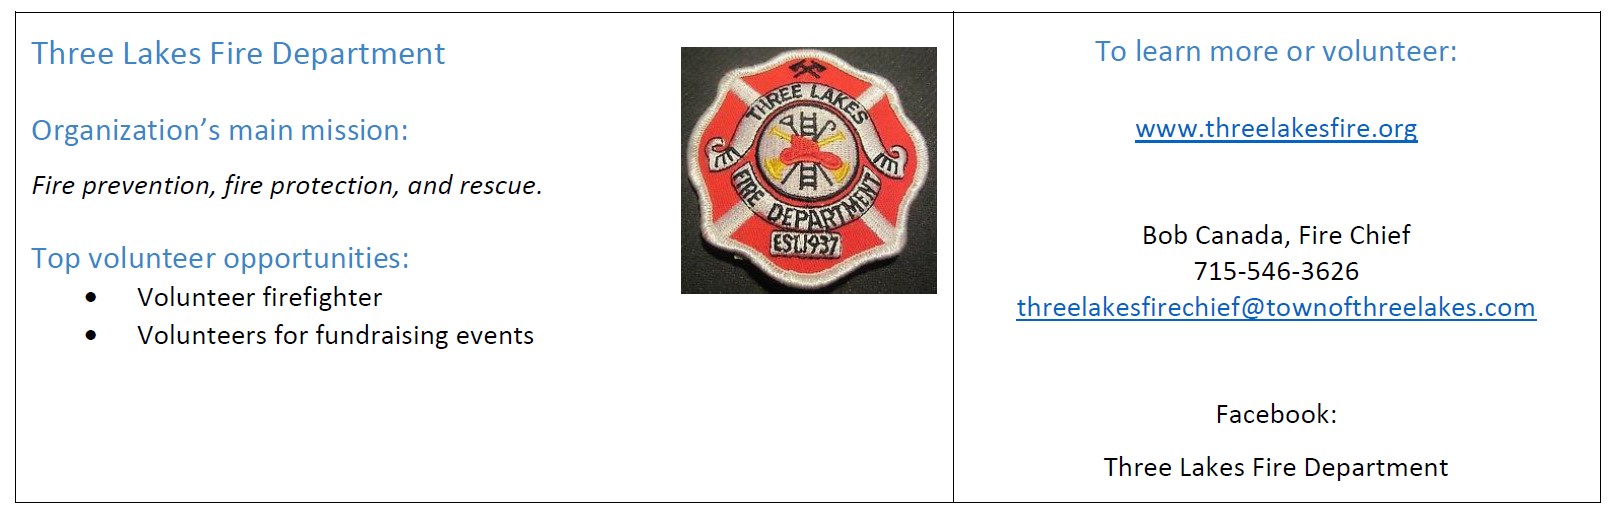 Volunteer opportunities at the Three Lakes Fire Department